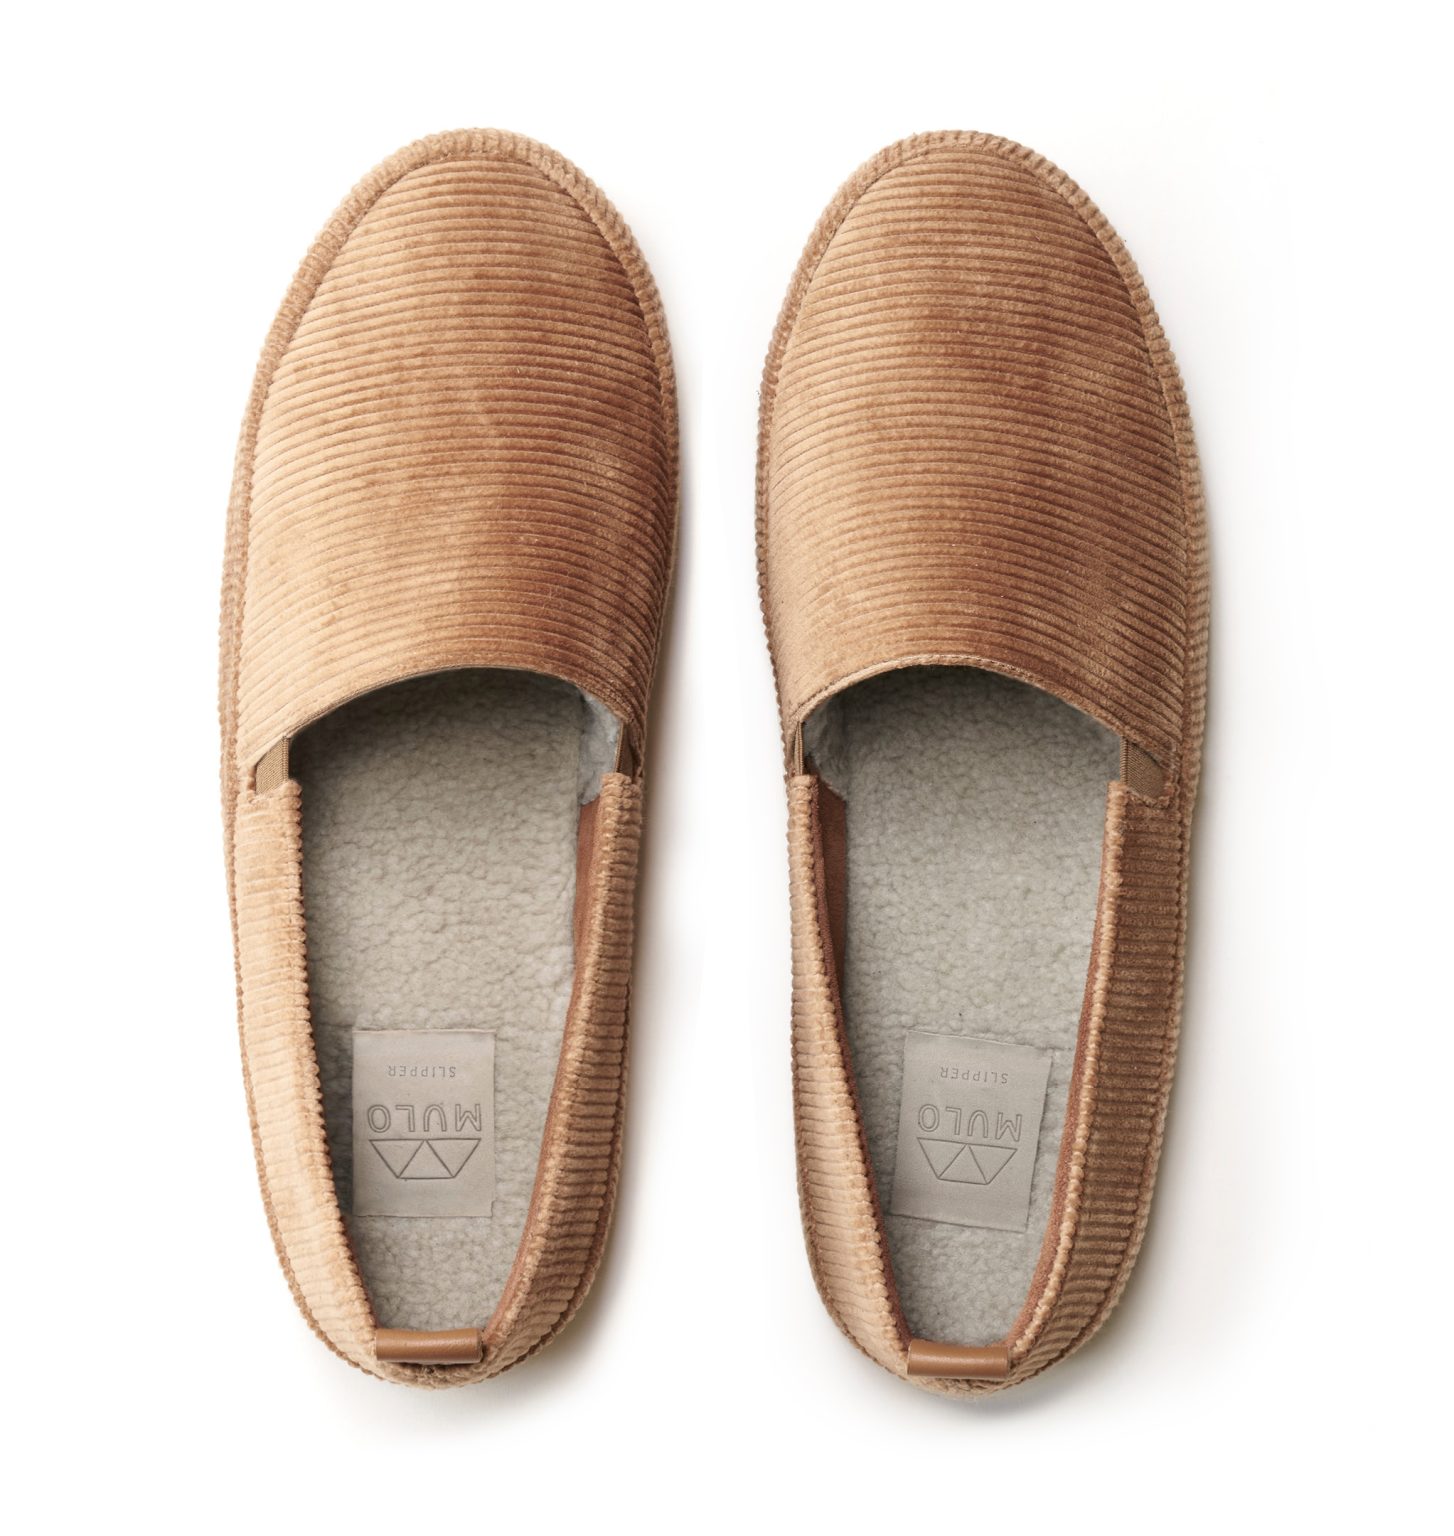 Mens Slippers in Camel Corduroy | MULO shoes | Soft Natural Shearling